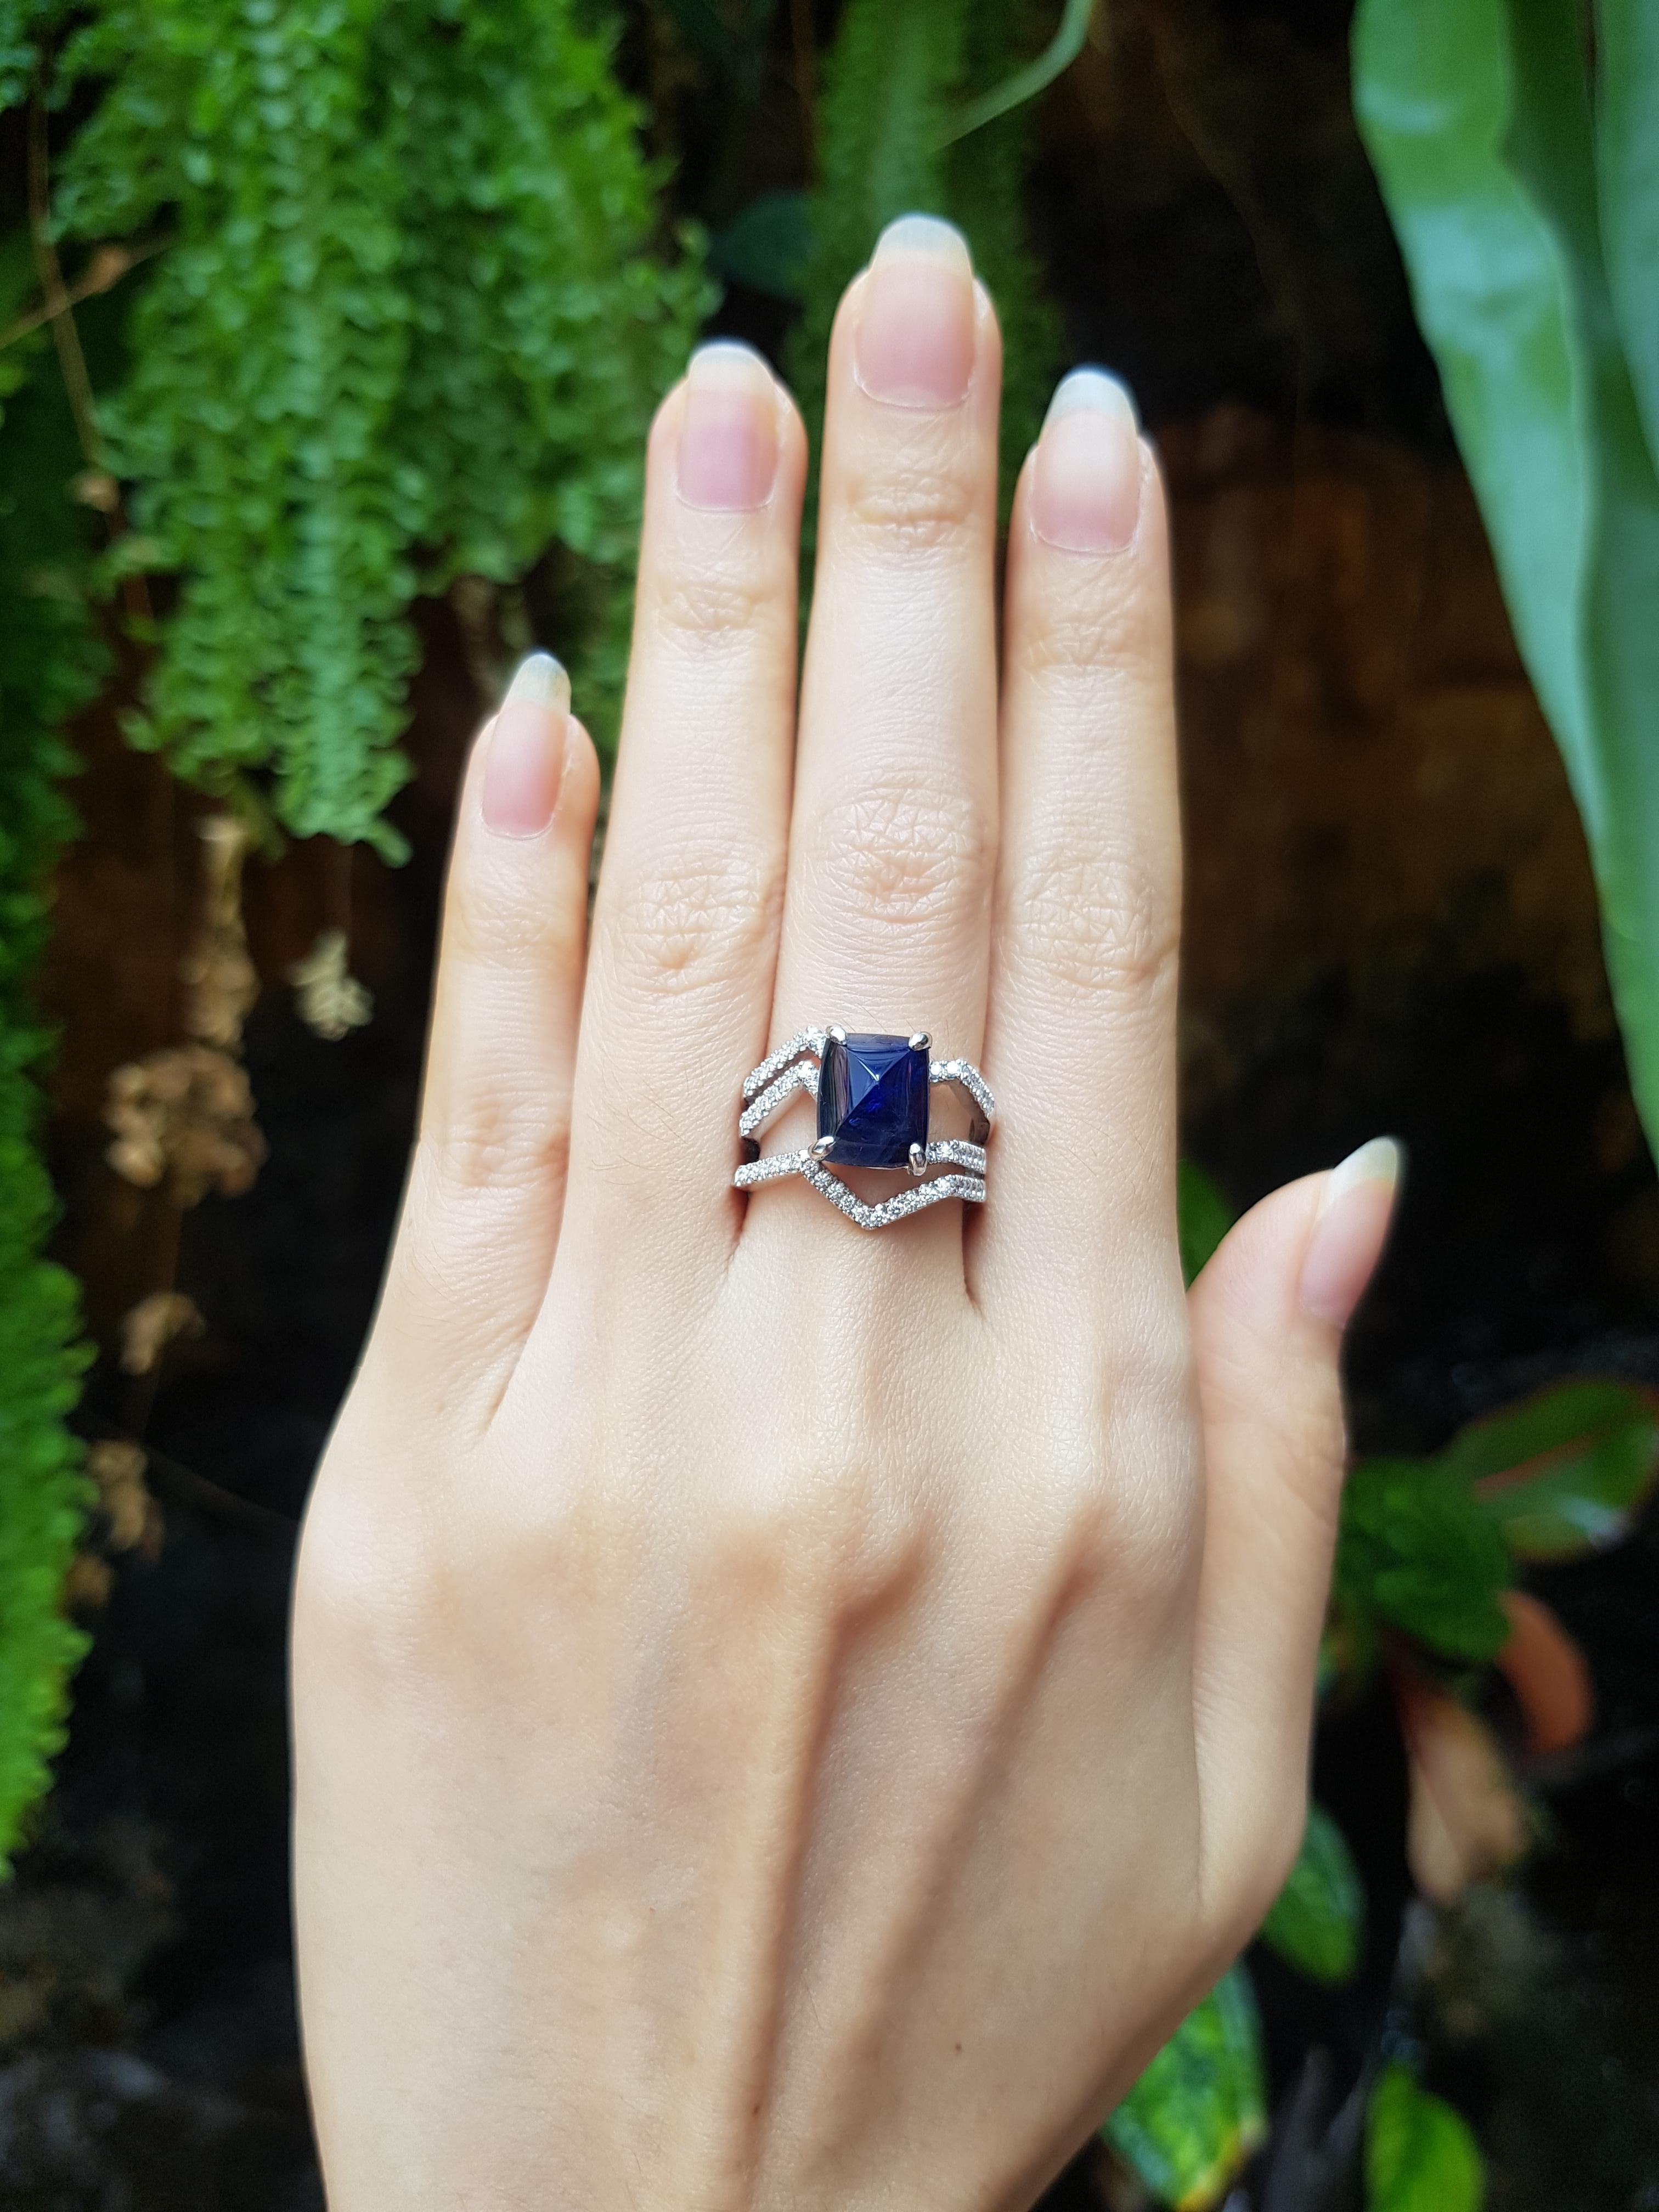 Cabochon Blue Sapphire 4.10 carats with Diamond 0.31 carat Ring set in 18 Karat White Gold Settings
(GIT Certified, The Gem and Jewelry Institute of Thailand)

Width:  1.5 cm 
Length: 2.0 cm
Ring Size: 52
Total Weight: 8.91 grams

